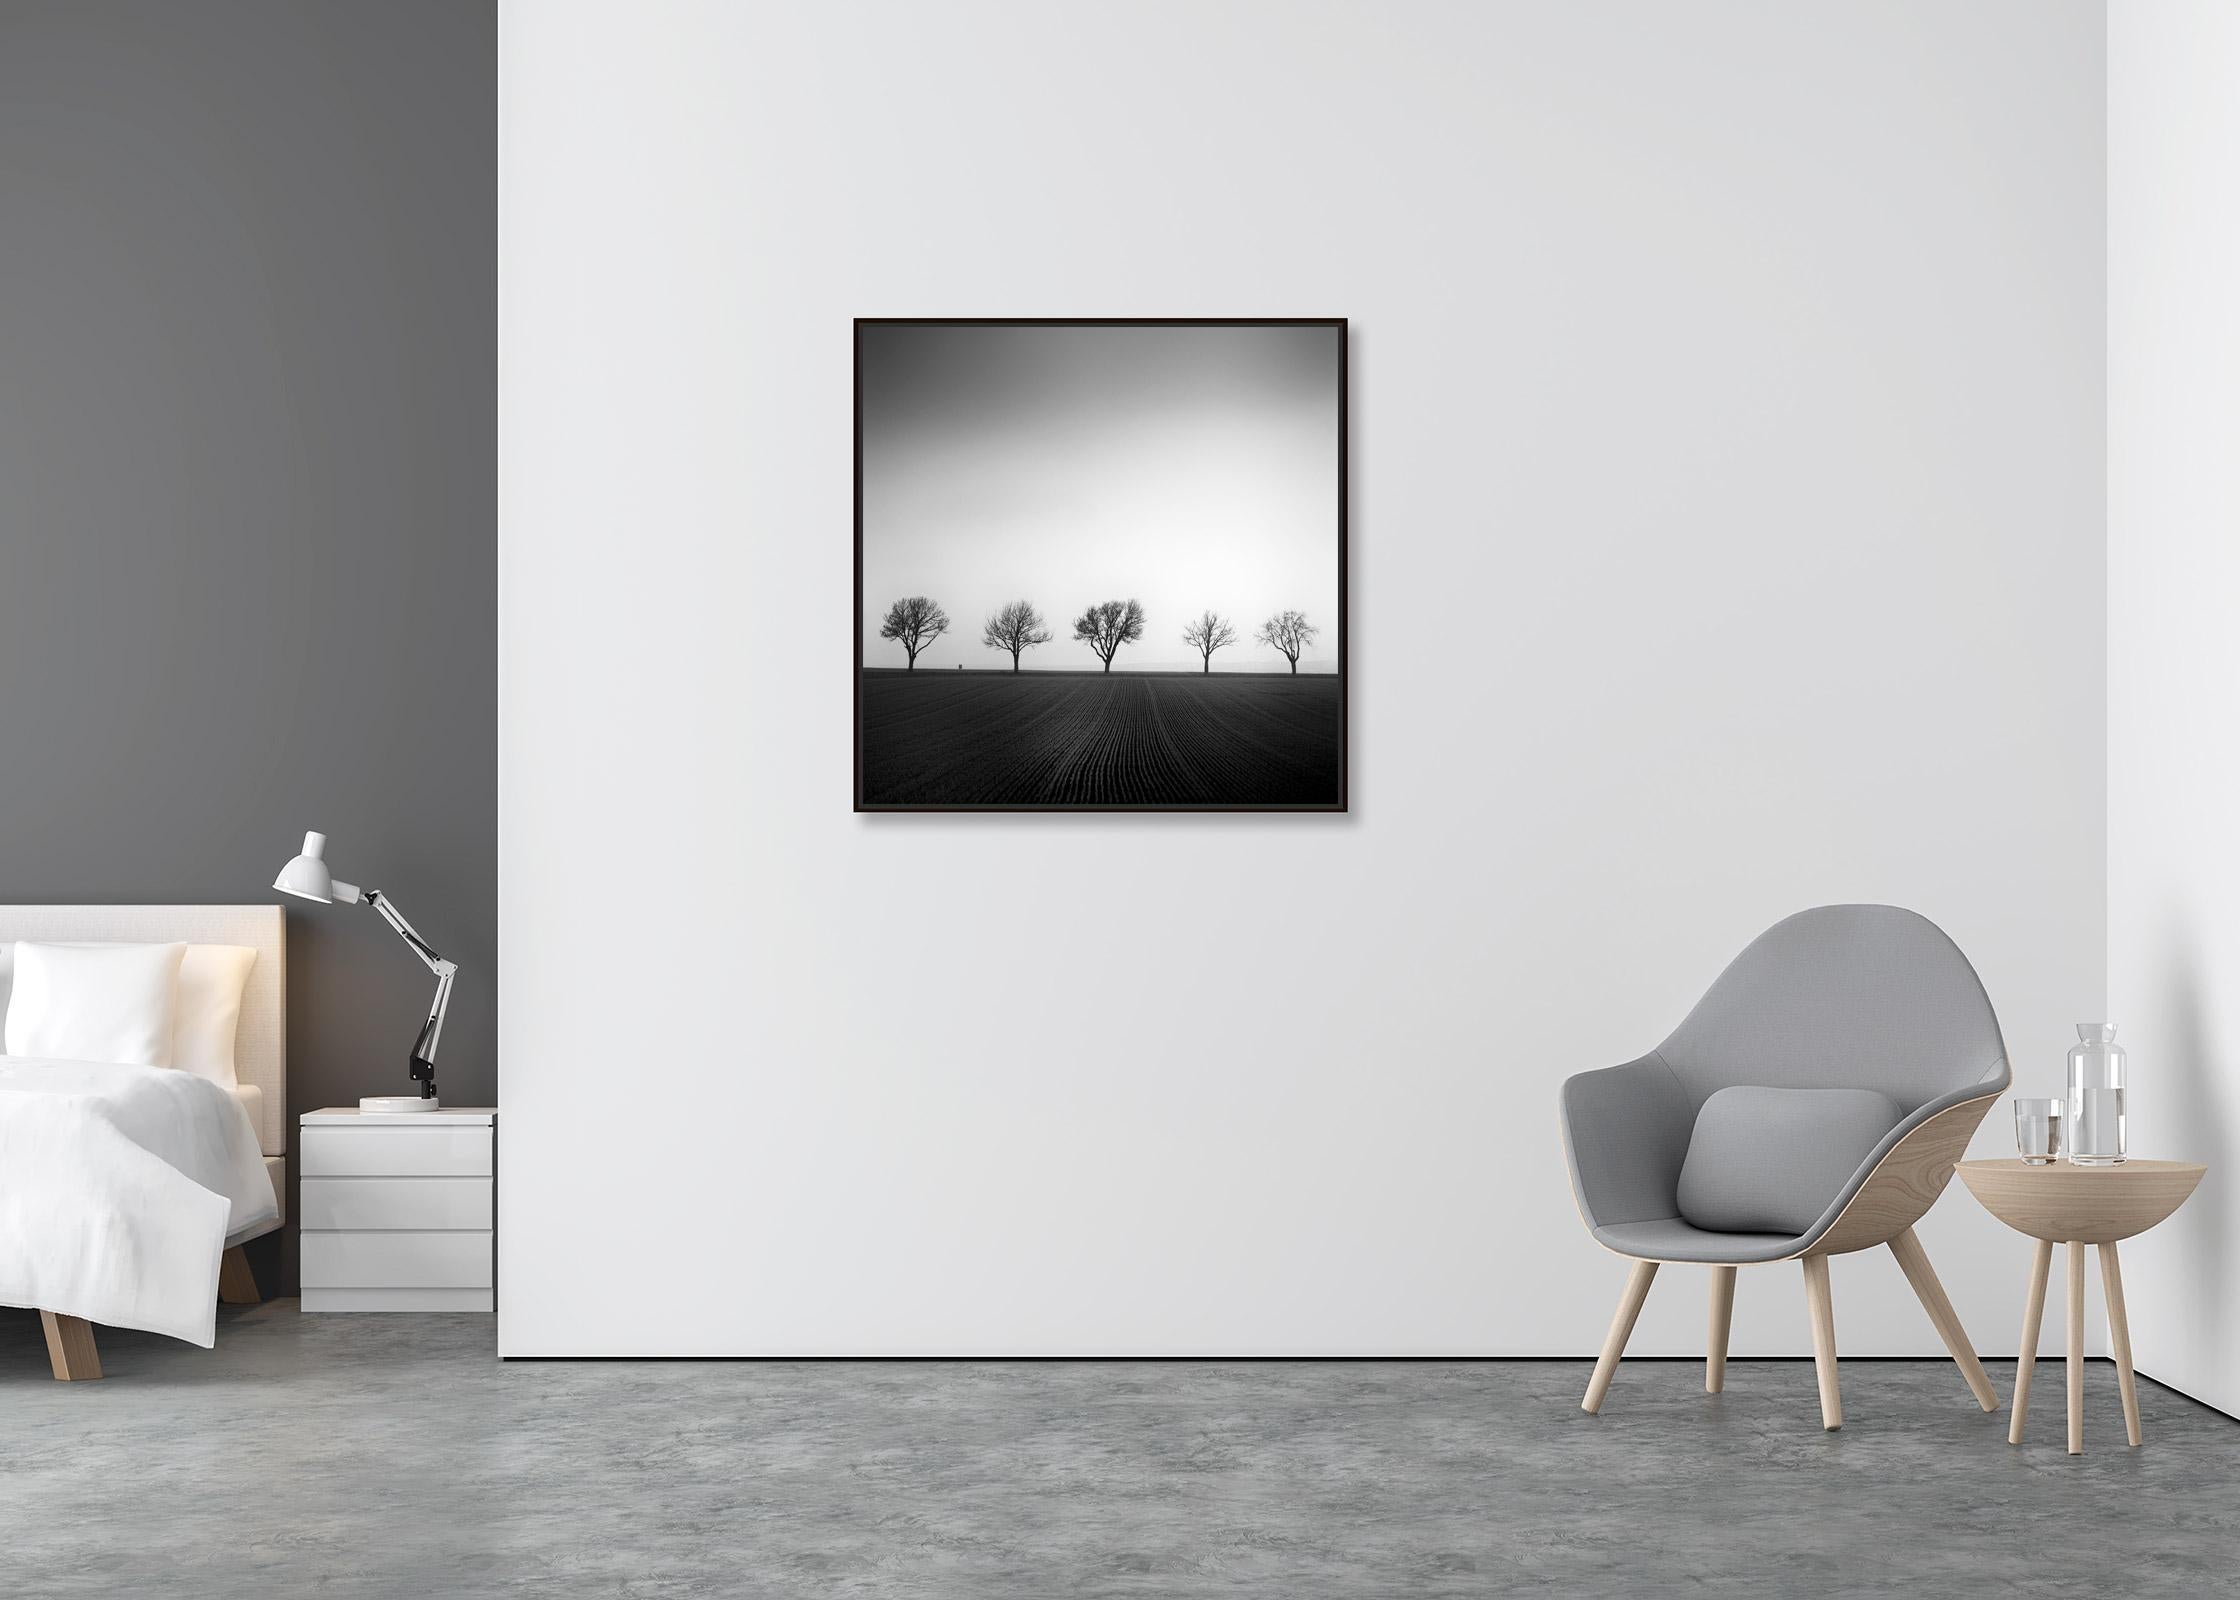 Cherry Tree Avenue, minimalist black and white photography, landscape, fine art - Contemporary Photograph by Gerald Berghammer